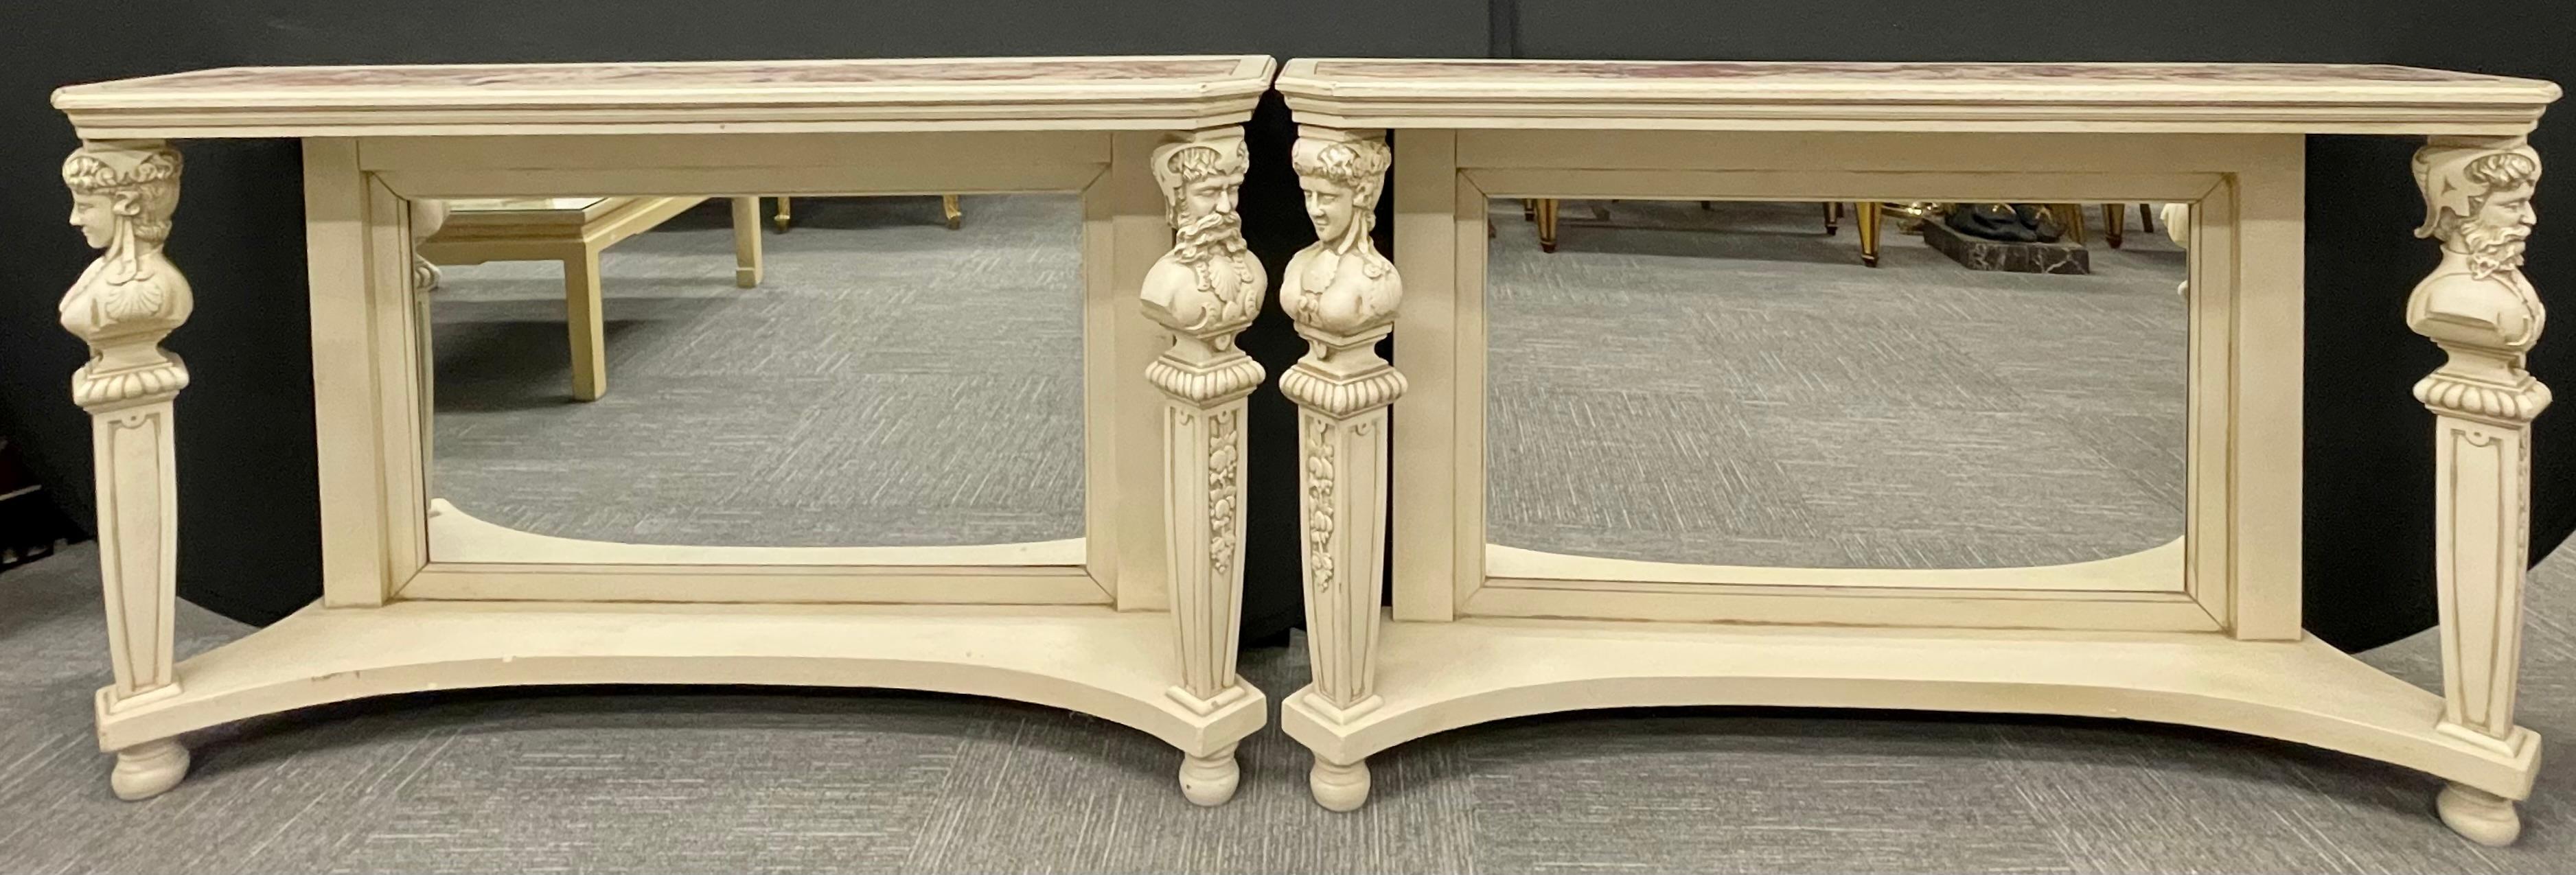 Gustavian Pair of Swedish Marble-Top Painted Pier Console Tables, Figural